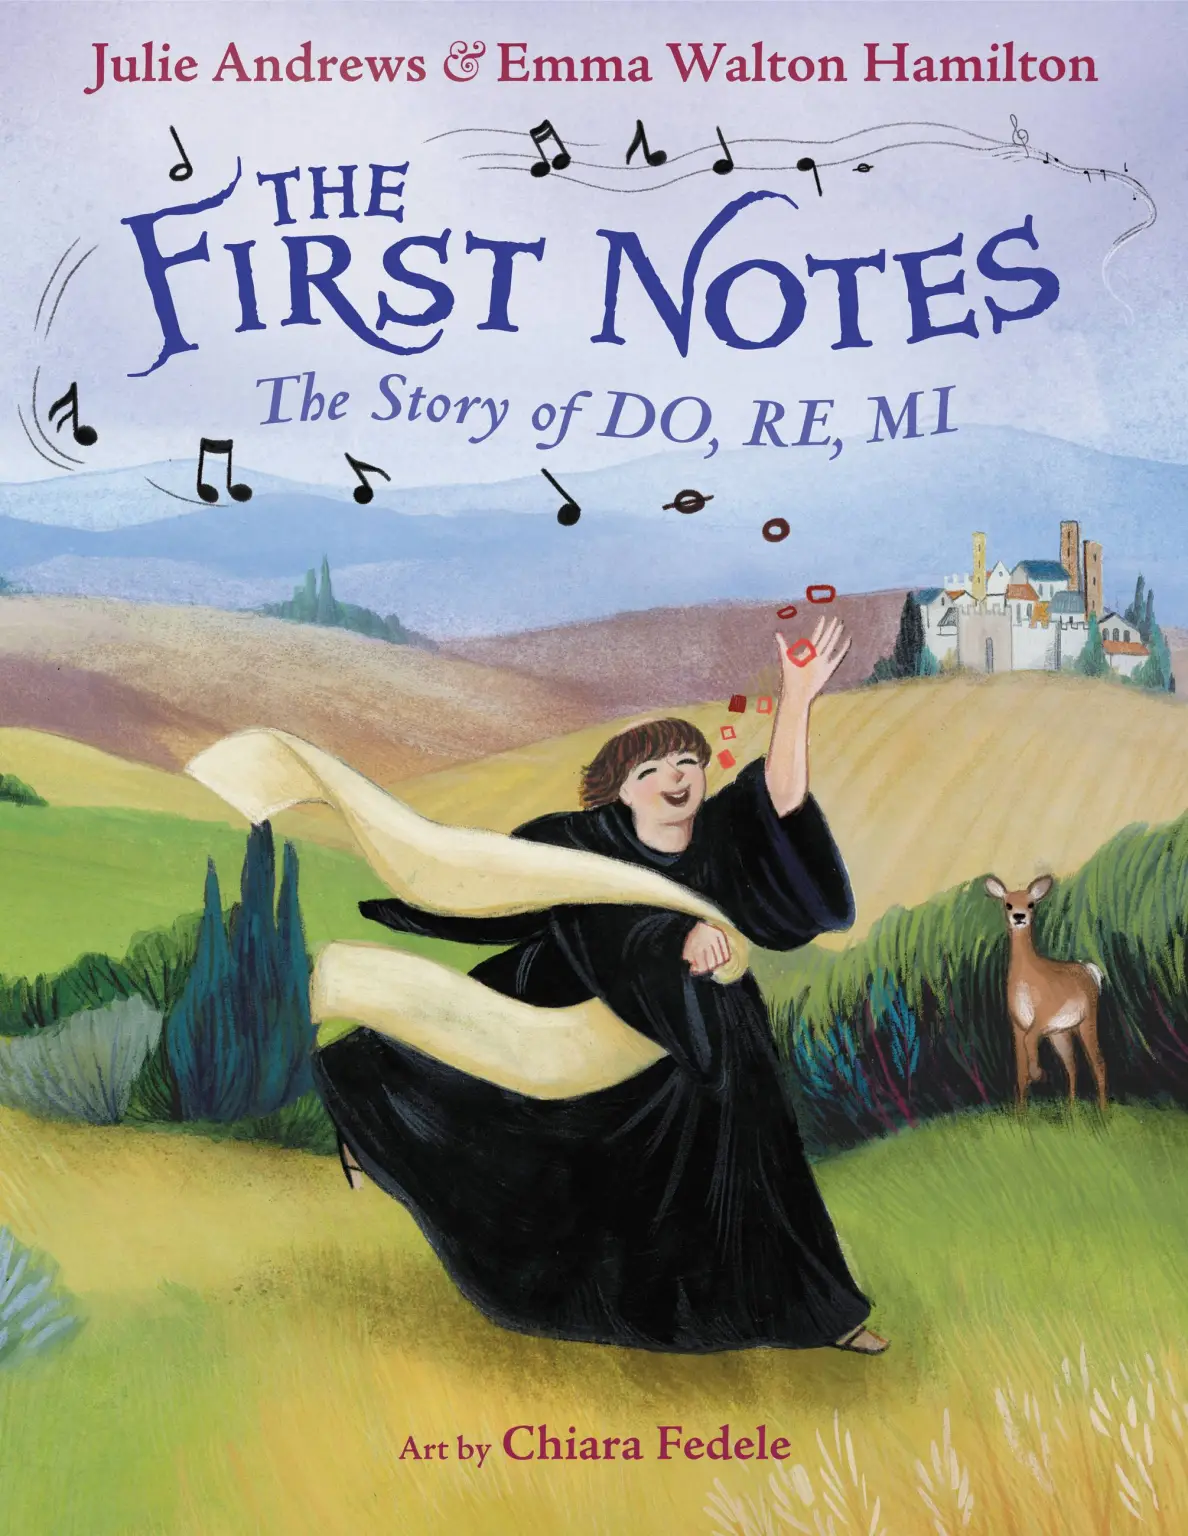   <!-- 1 -->The First Notes:  The Story of Do, Re, Mi<br>Julie Andrews and Emma Walton Hamilton